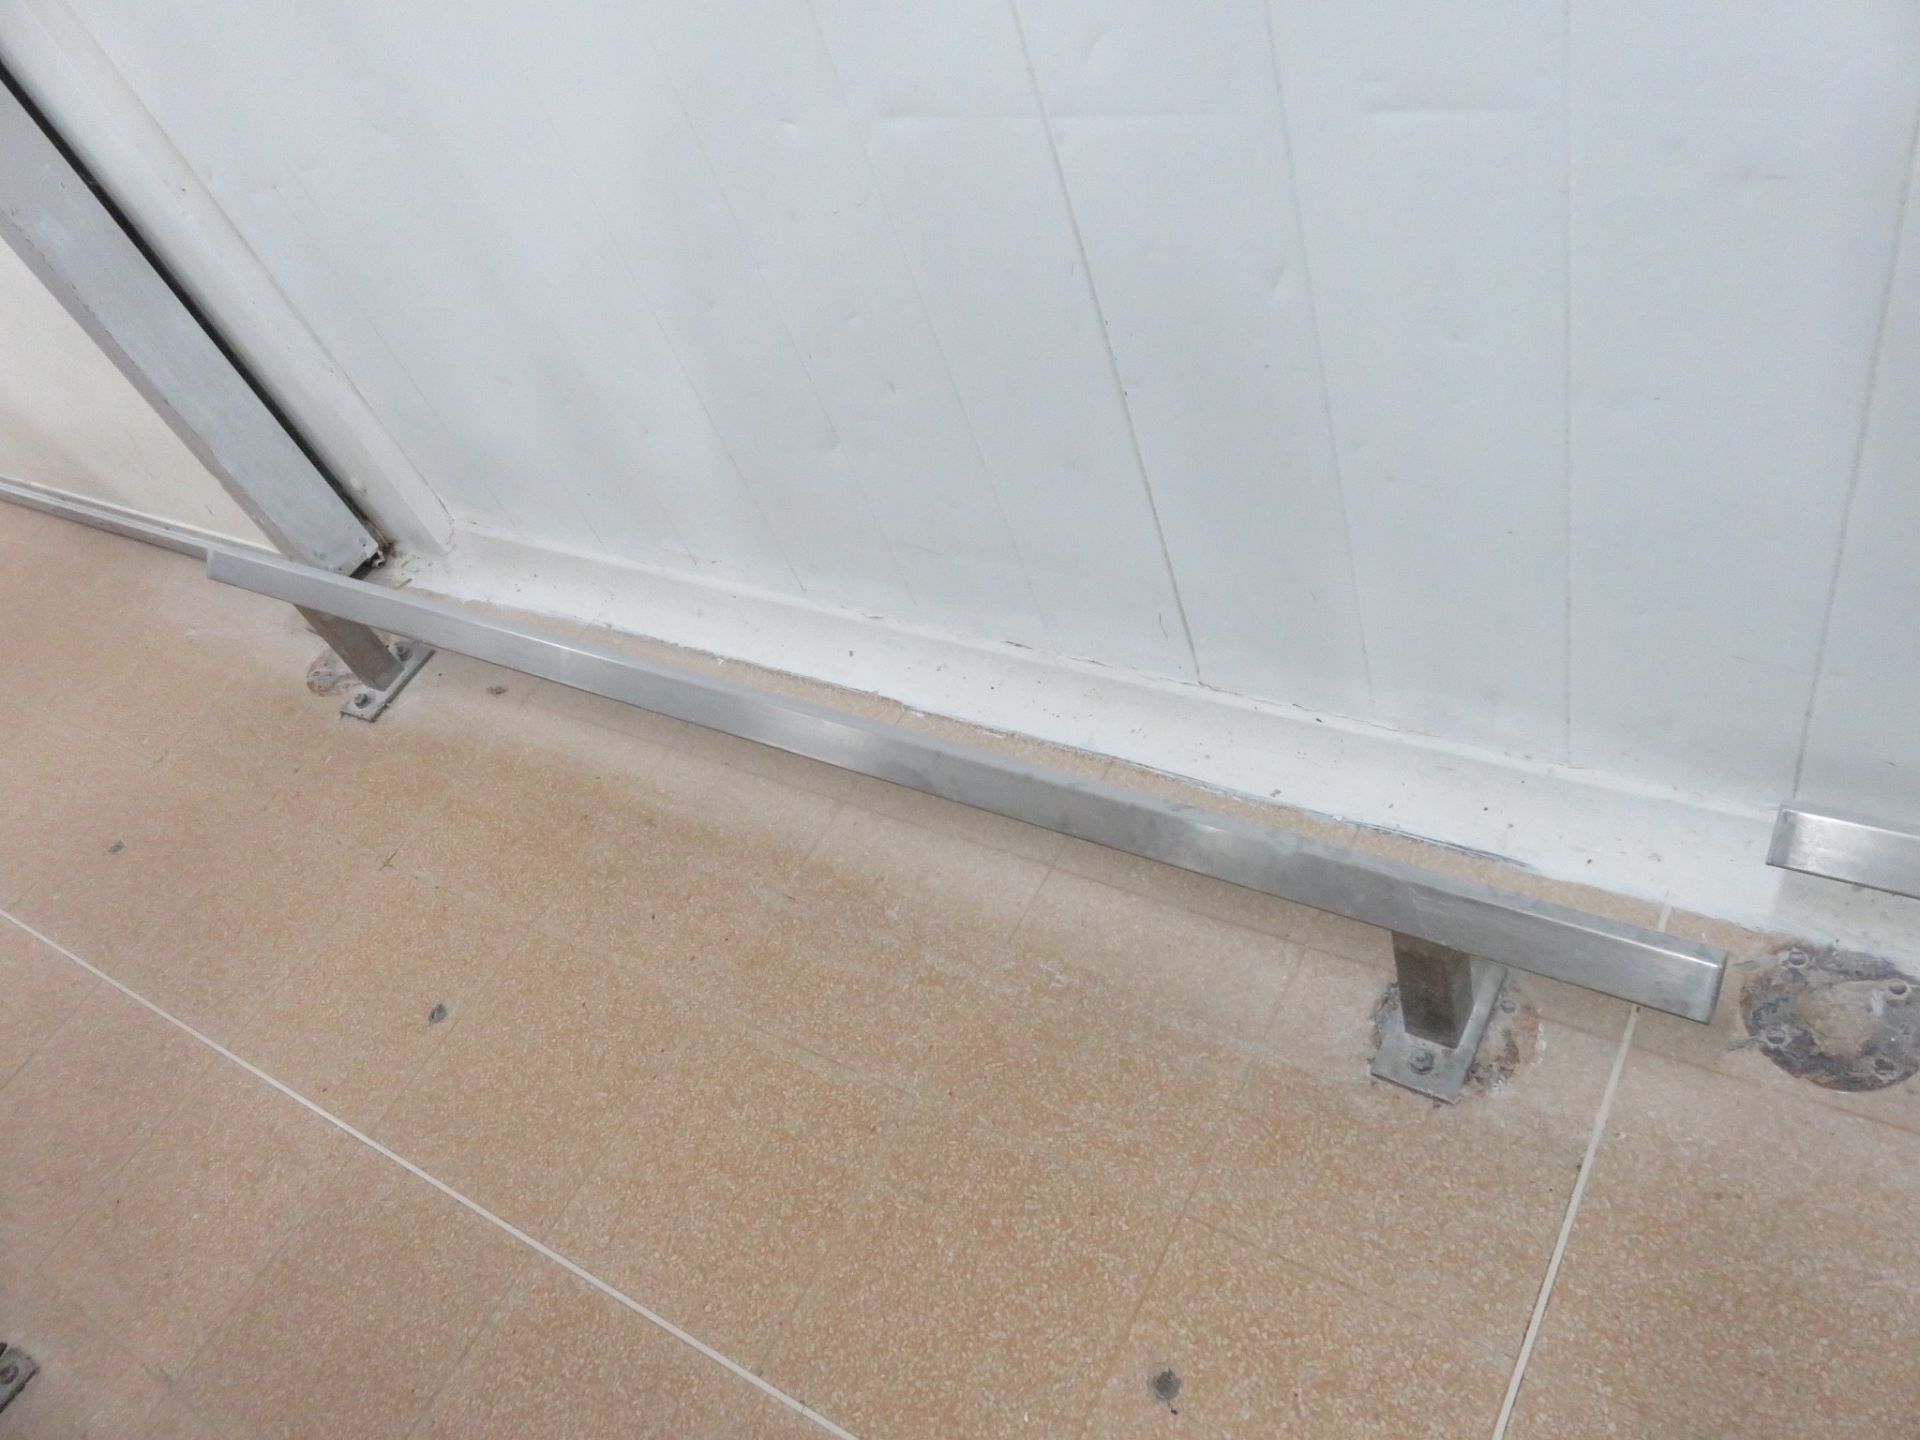 2 x S/s Bumper Bars. Approx 7 meters and 2 meters. Lift Out £25 - Image 2 of 2